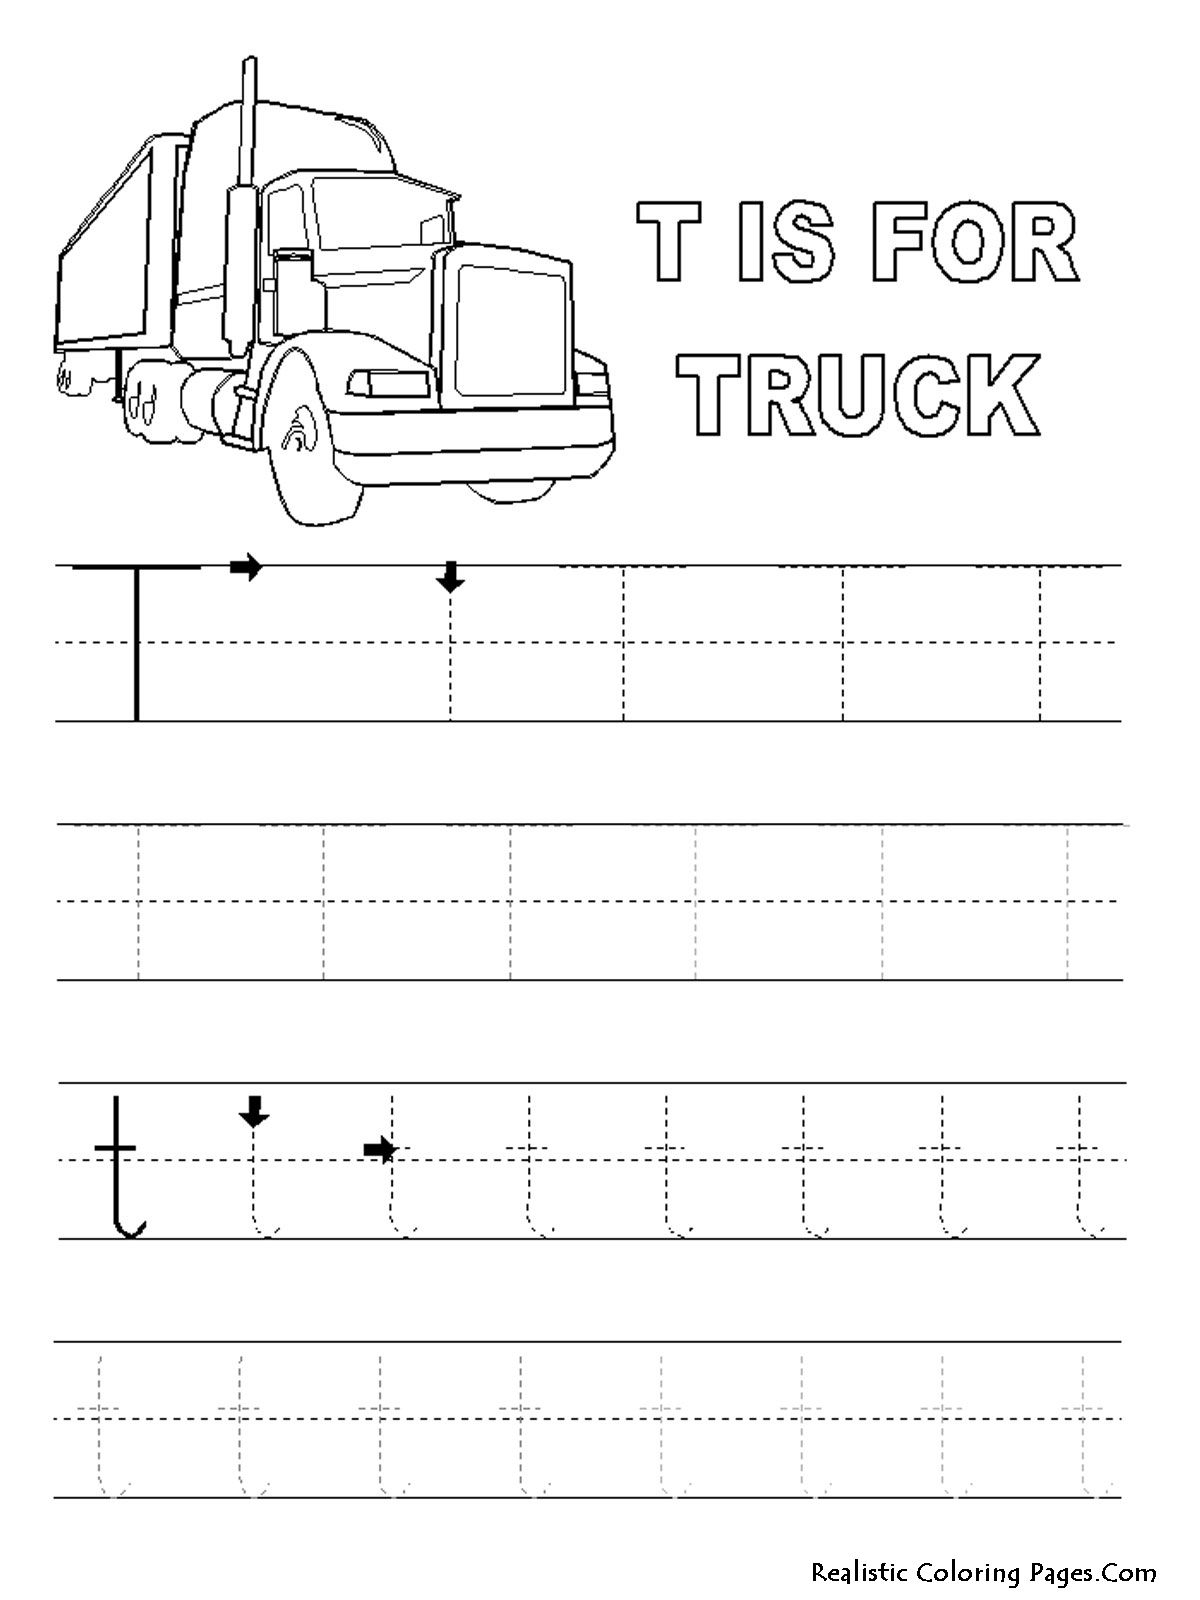 Letter T Worksheets And Coloring Pages For Preschoolers intended for Letter T Worksheets Pdf